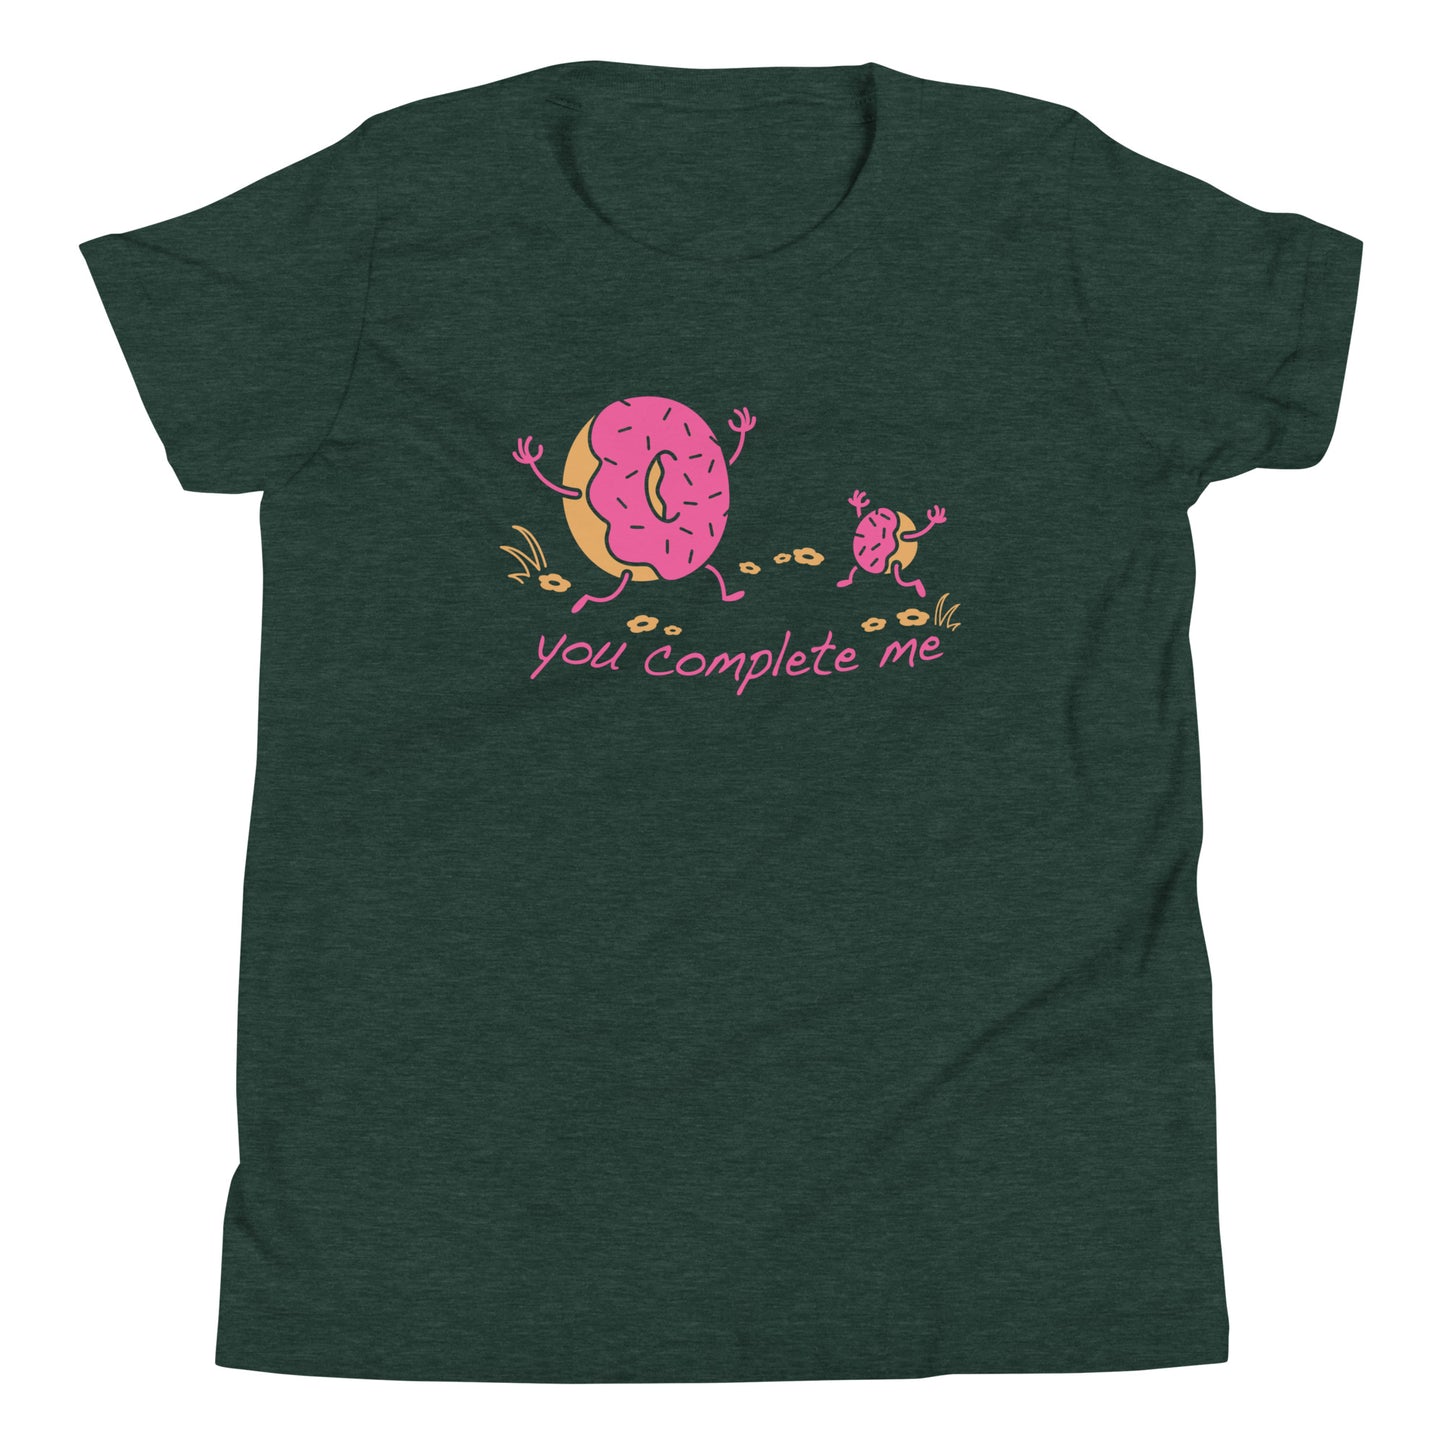 You Complete Me Kid's Youth Tee